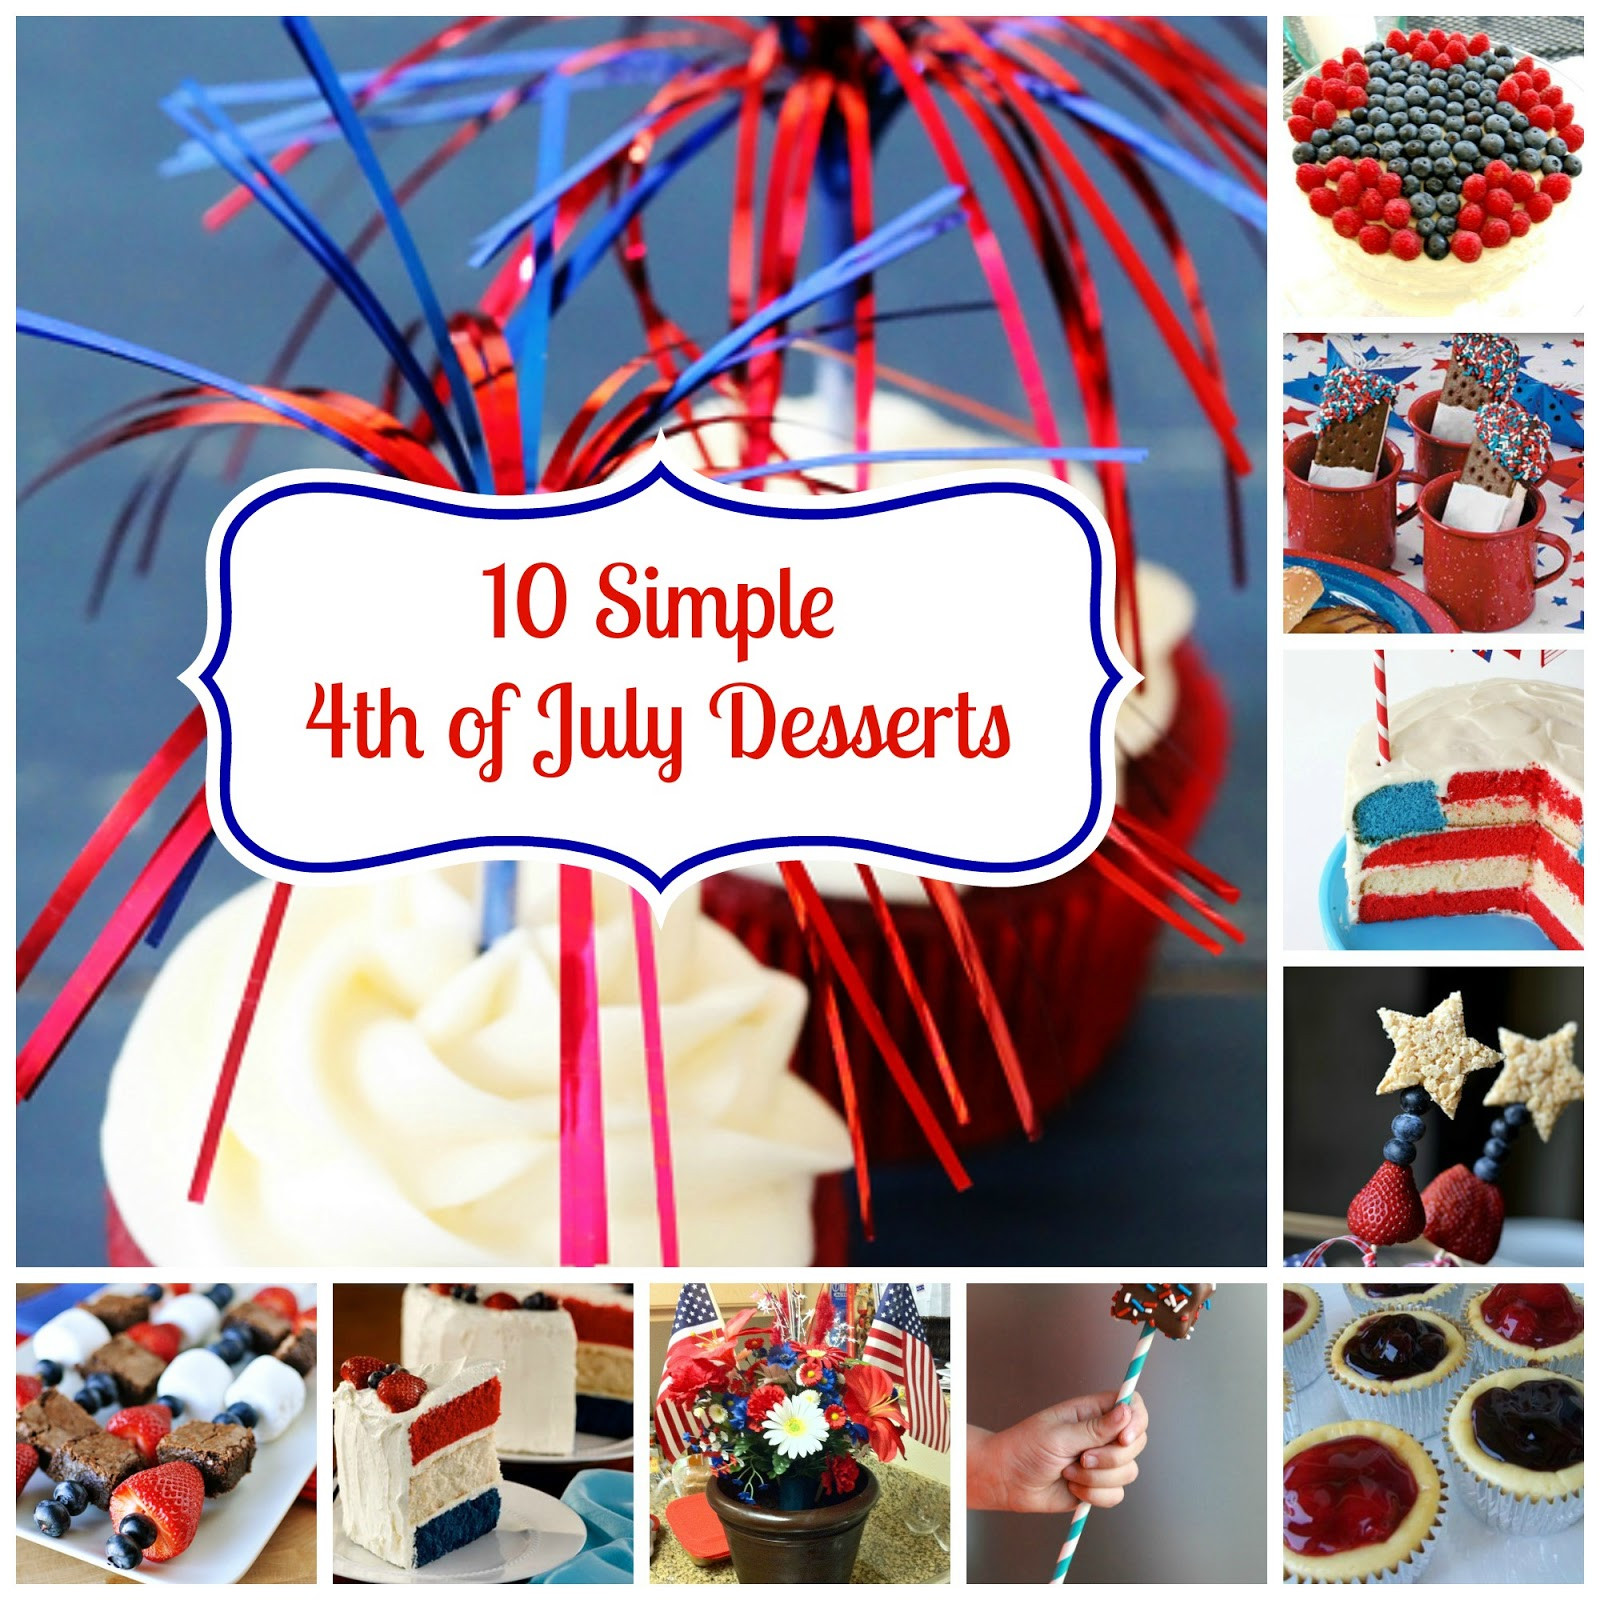 Simple 4Th Of July Desserts
 Simple 4th of July Desserts